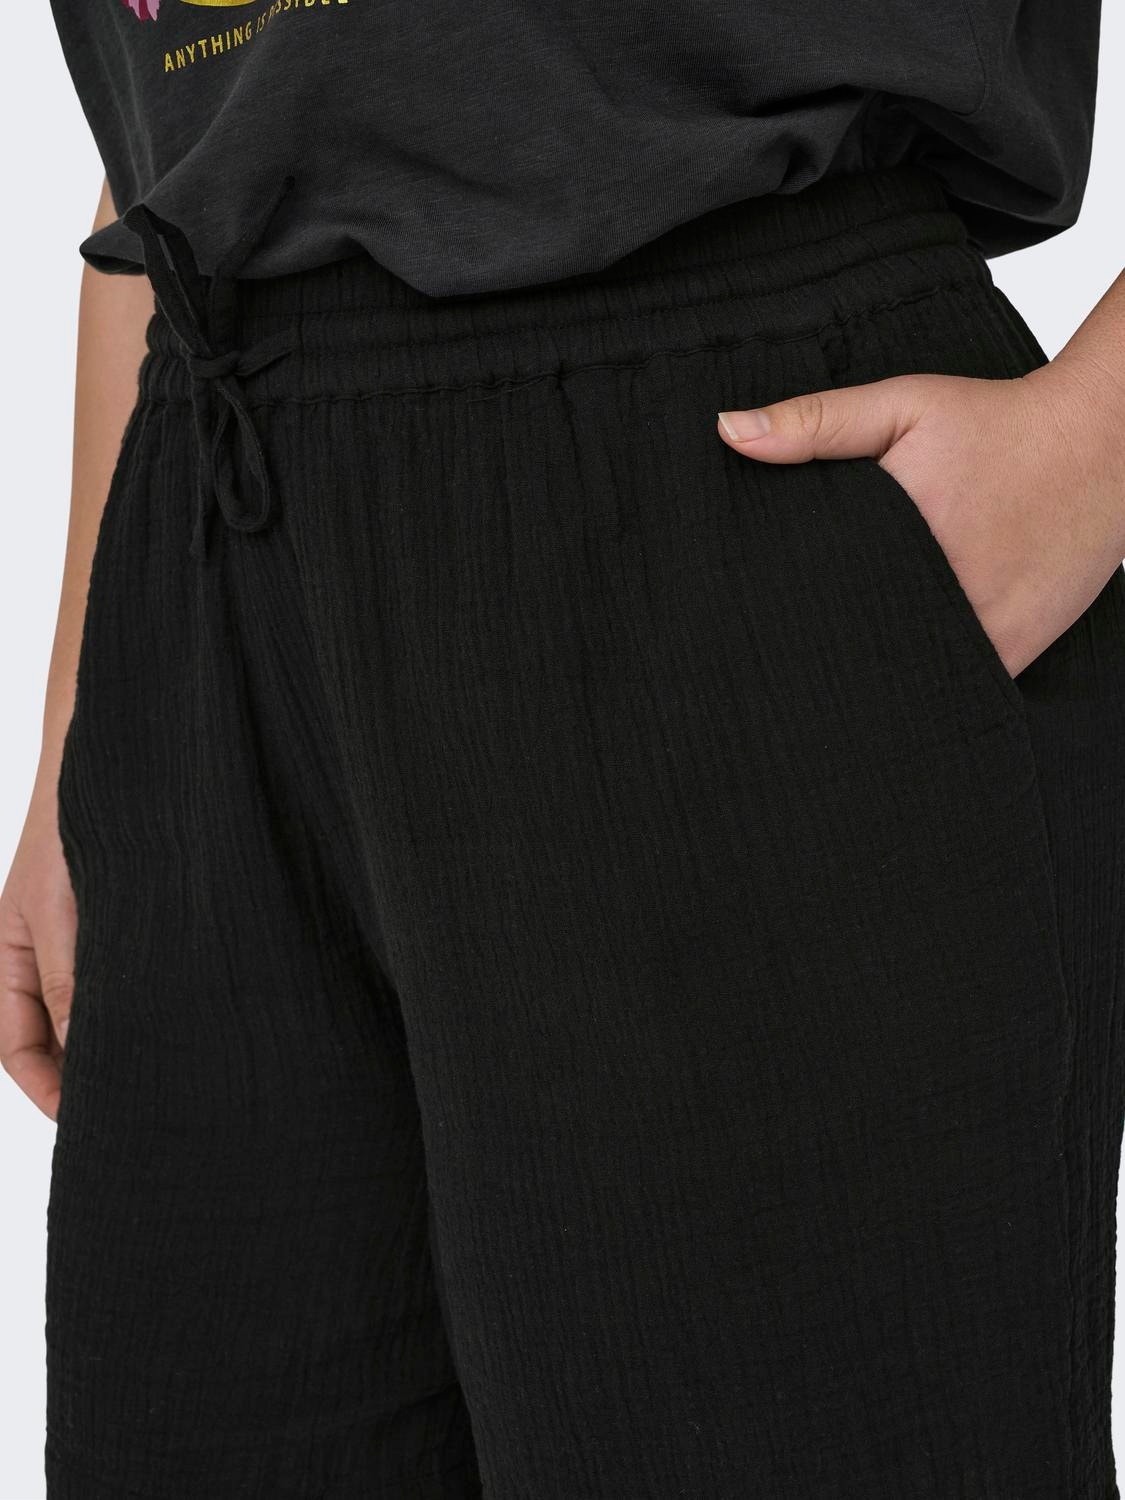 ONLY Curvy shorts with high waist -Black - 15326380